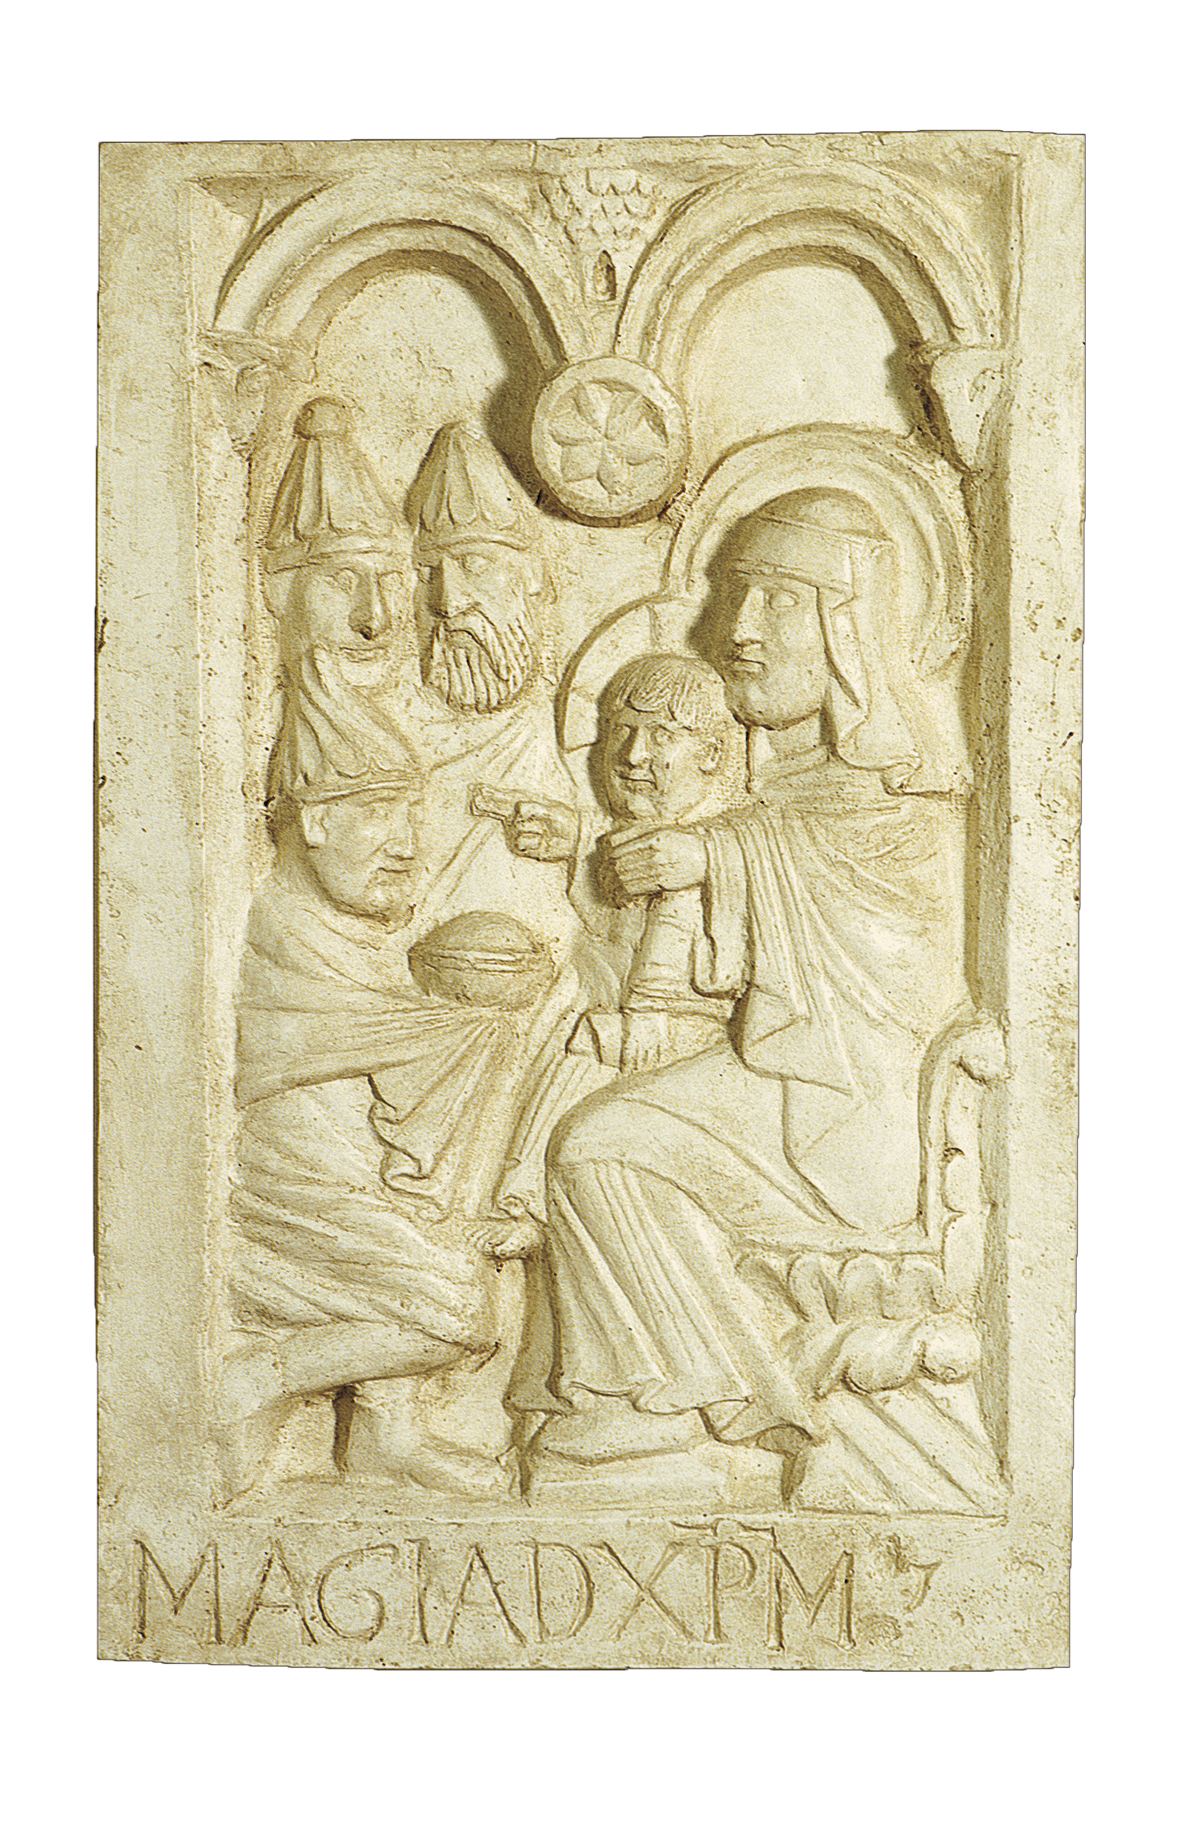 The Adoration of the Magi, a carved panel from the portal of Nonantola Abbey